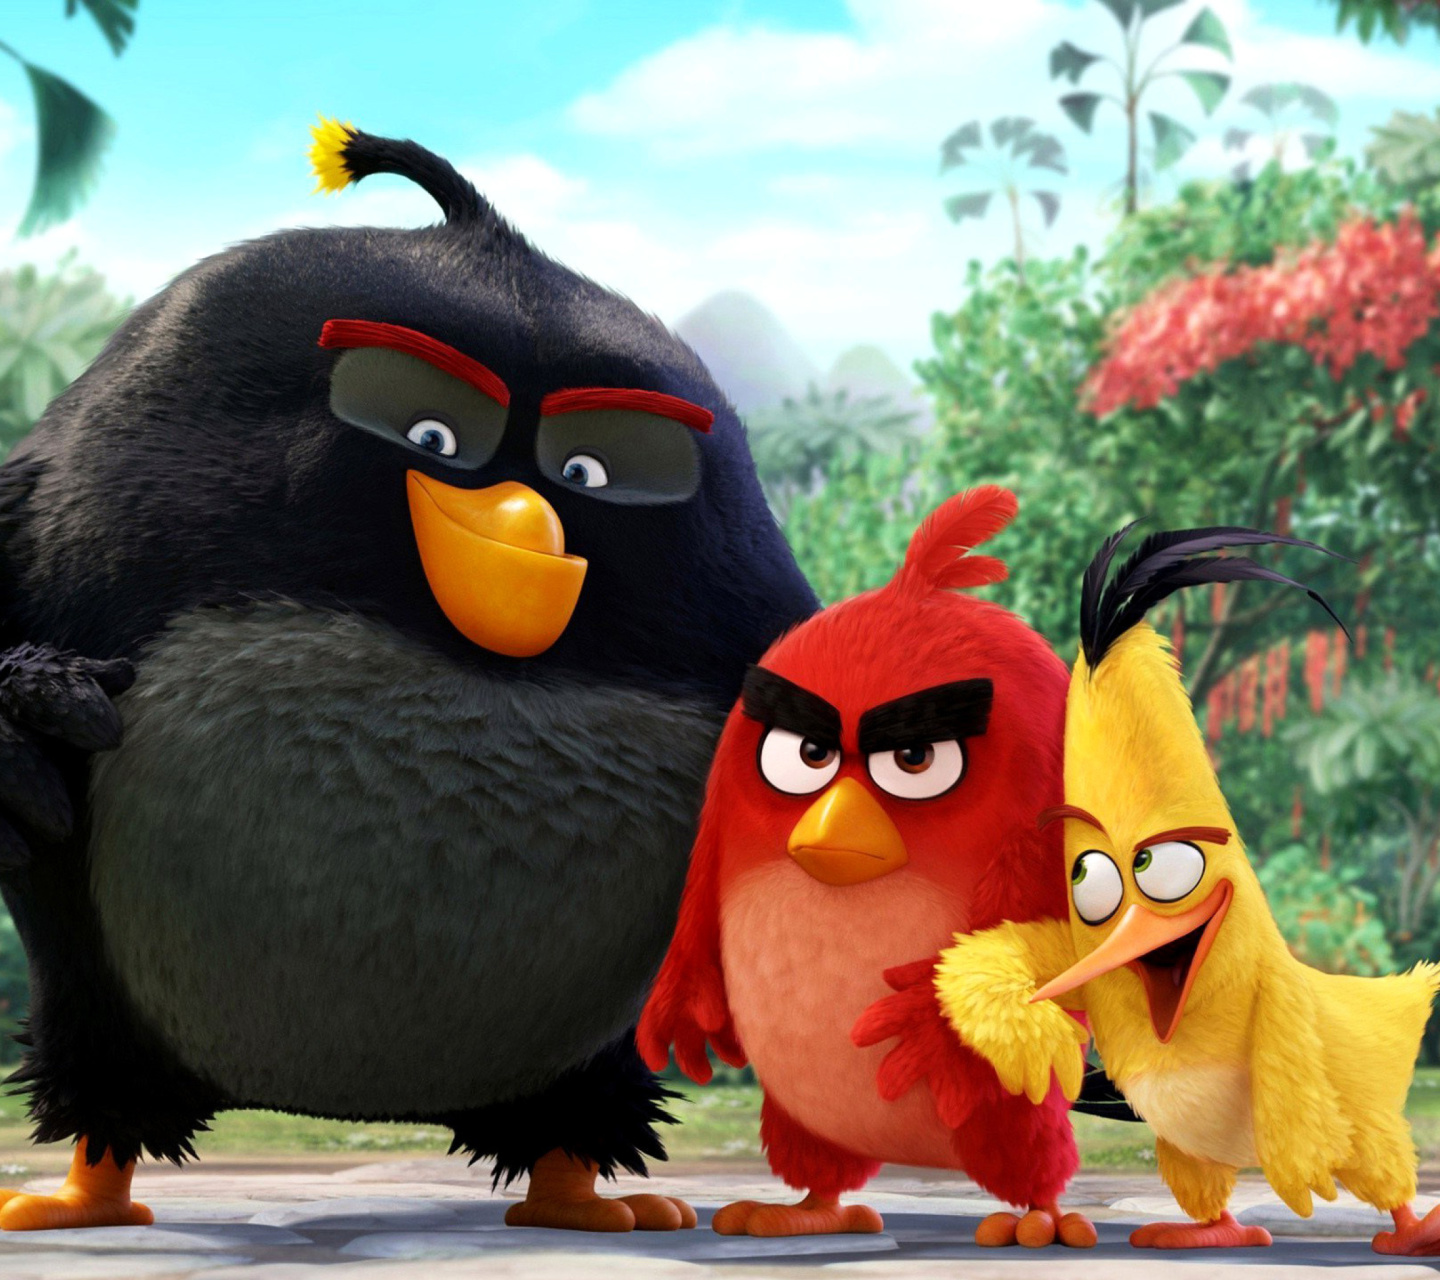 The Angry Birds Comedy Movie 2016 wallpaper 1440x1280